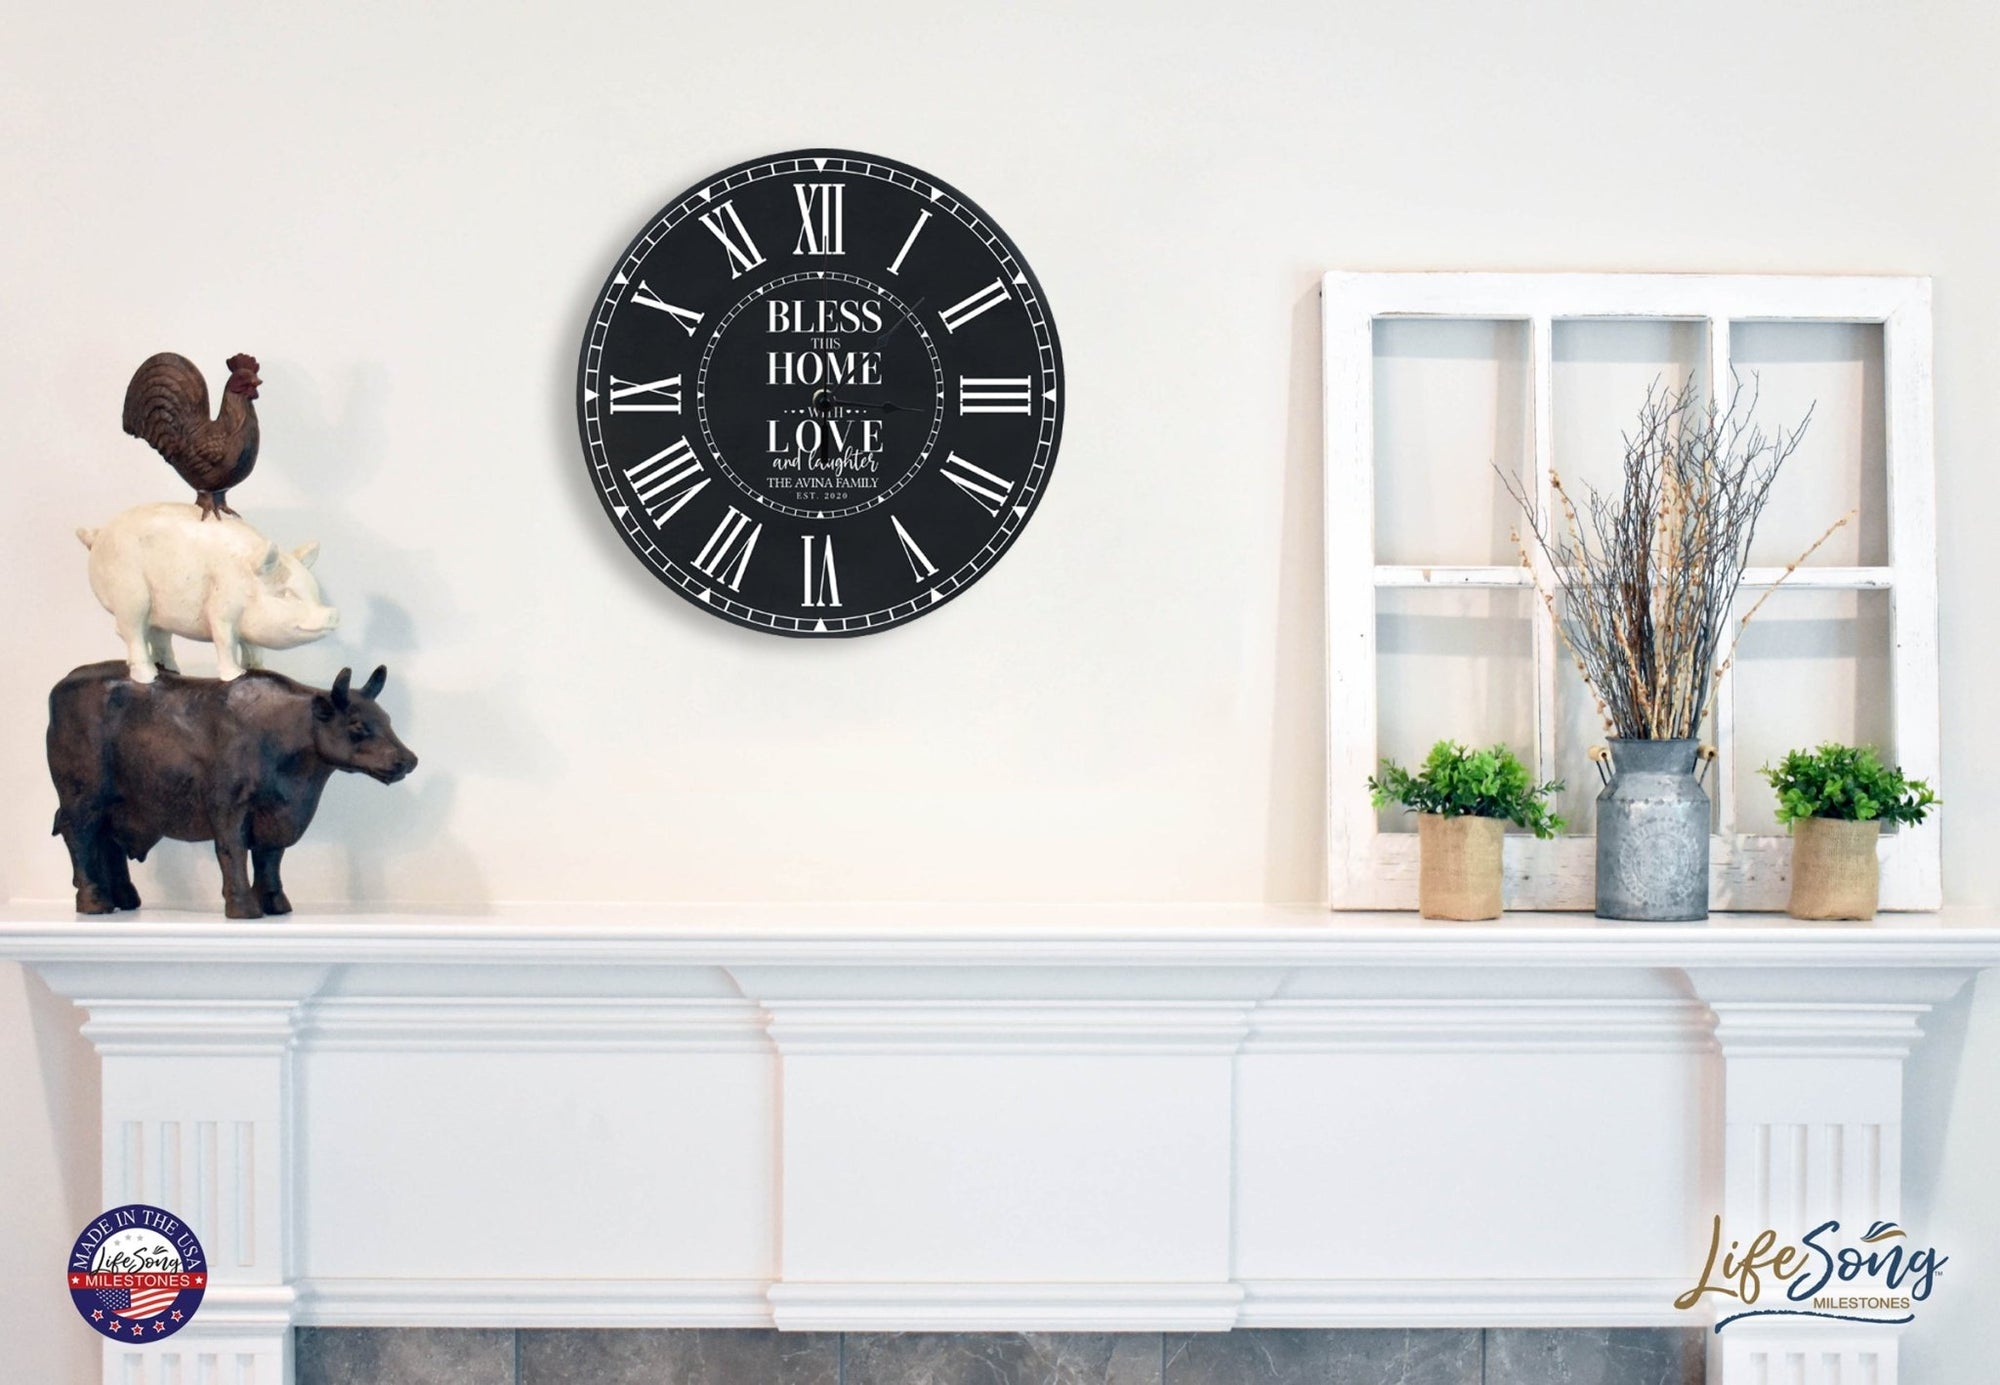 Personalized Inspirational Everyday Home and Family Wall Clock 12 x 12 x 0.75 - (Bless This Home) - LifeSong Milestones